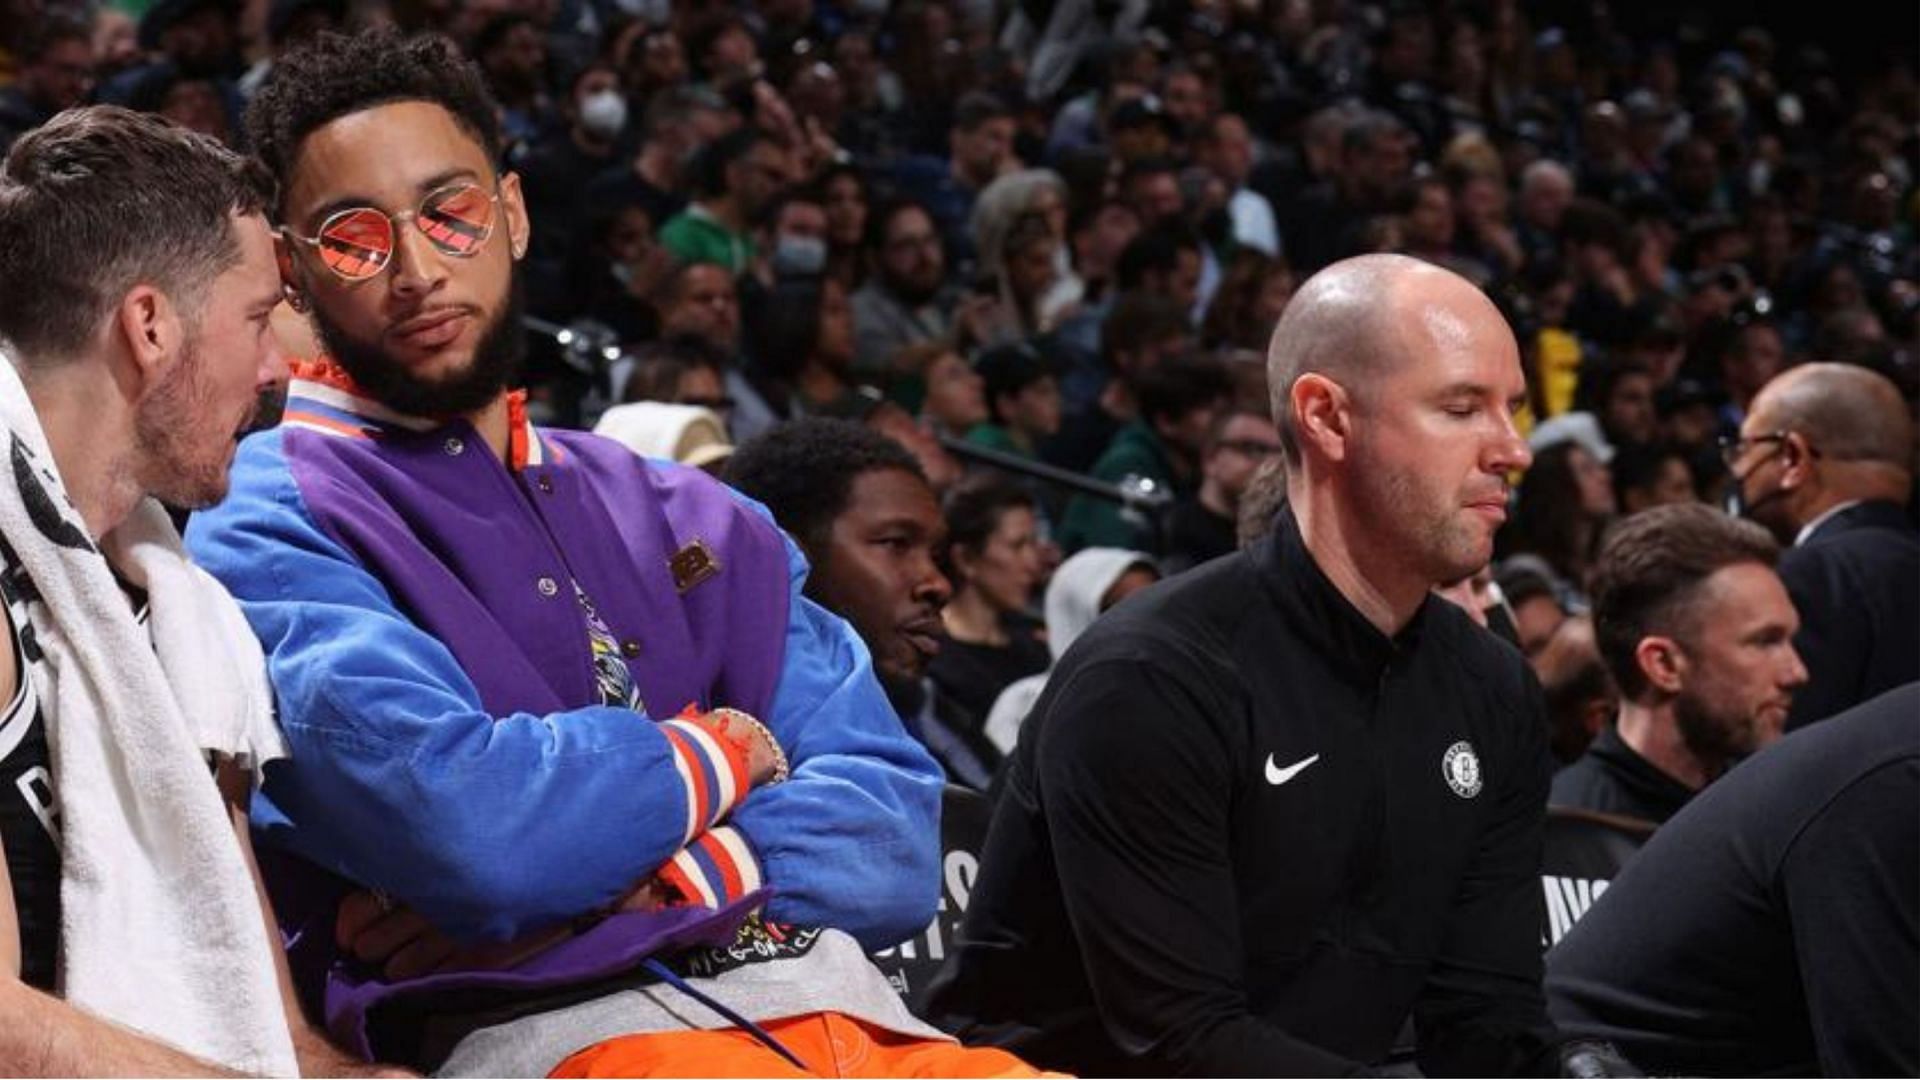 Ben Simmons watches Game 3 between the Brooklyn Nets and the Boston Celtics from the bench